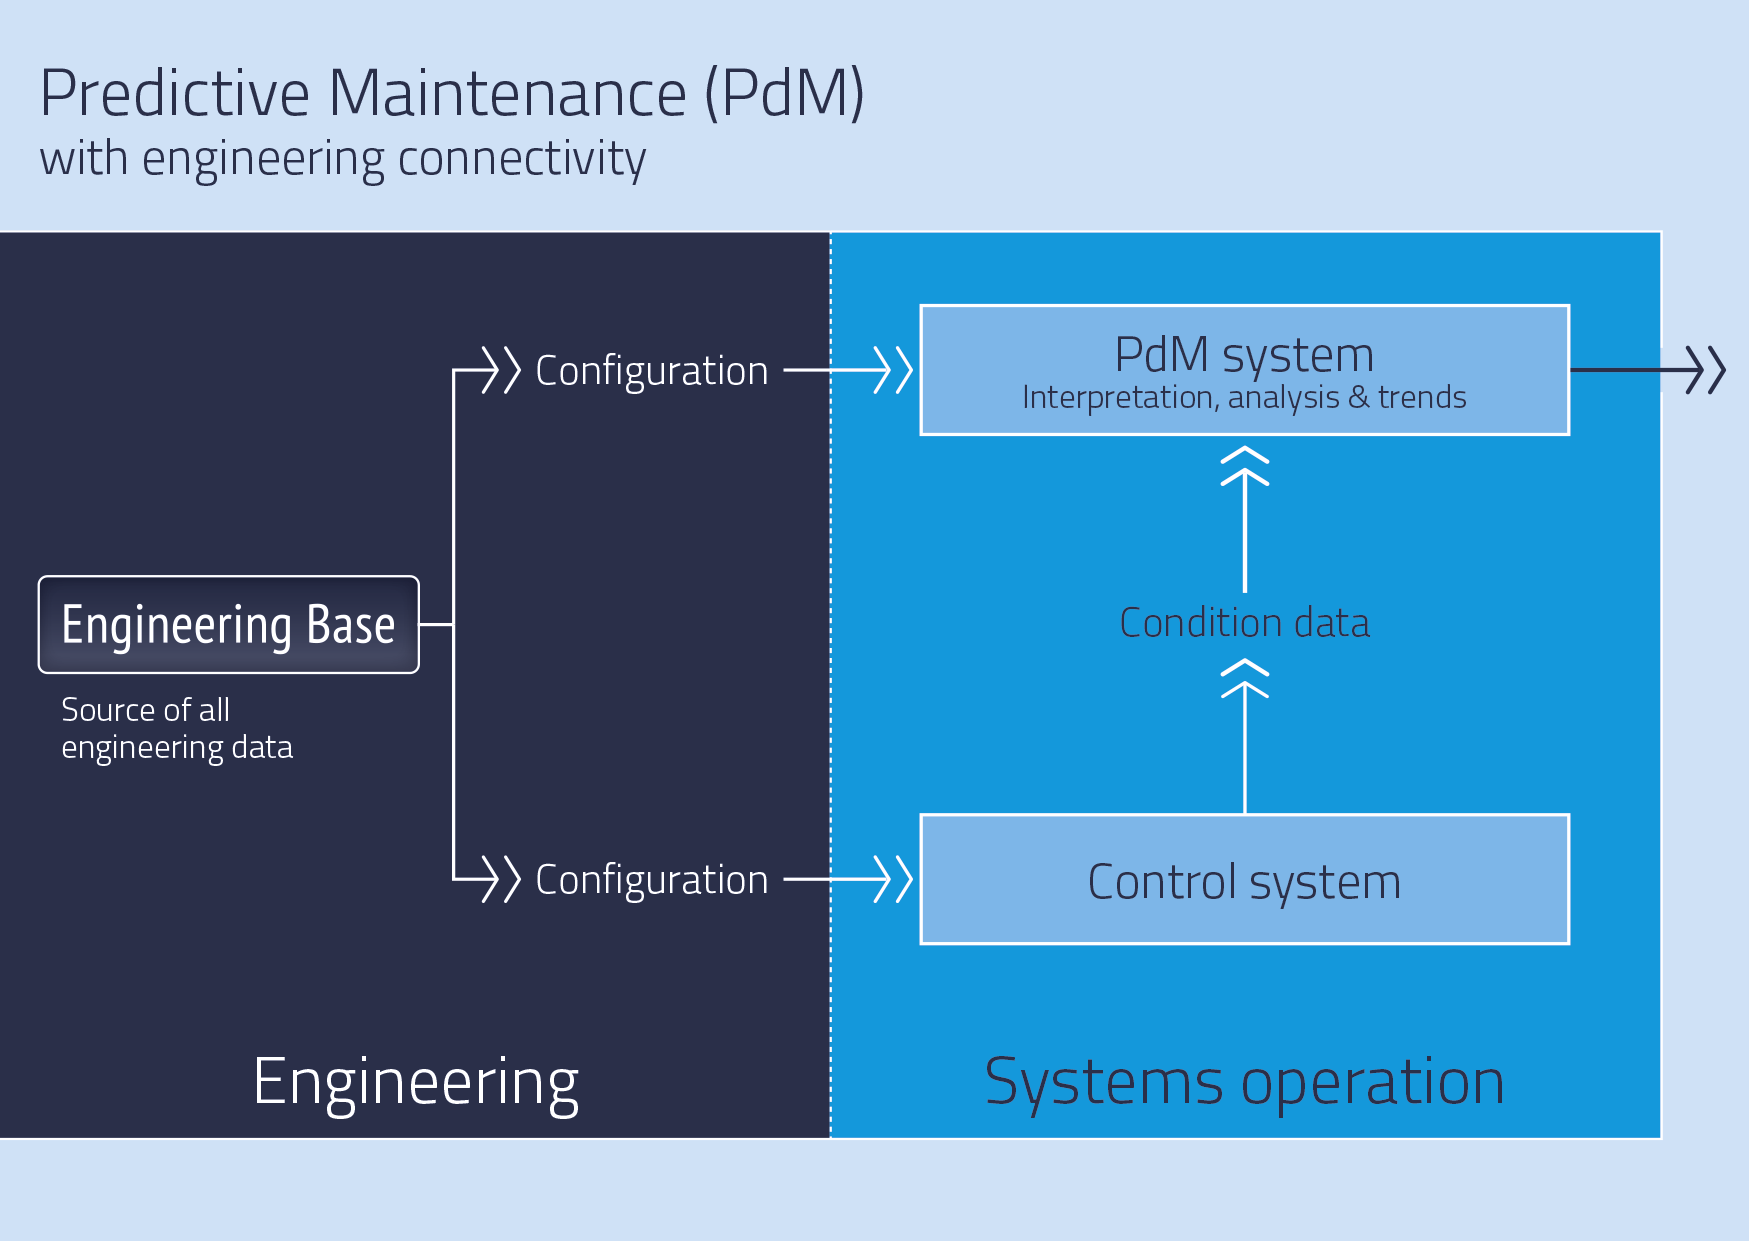 Predictive Maintenance with Engineering-Connection